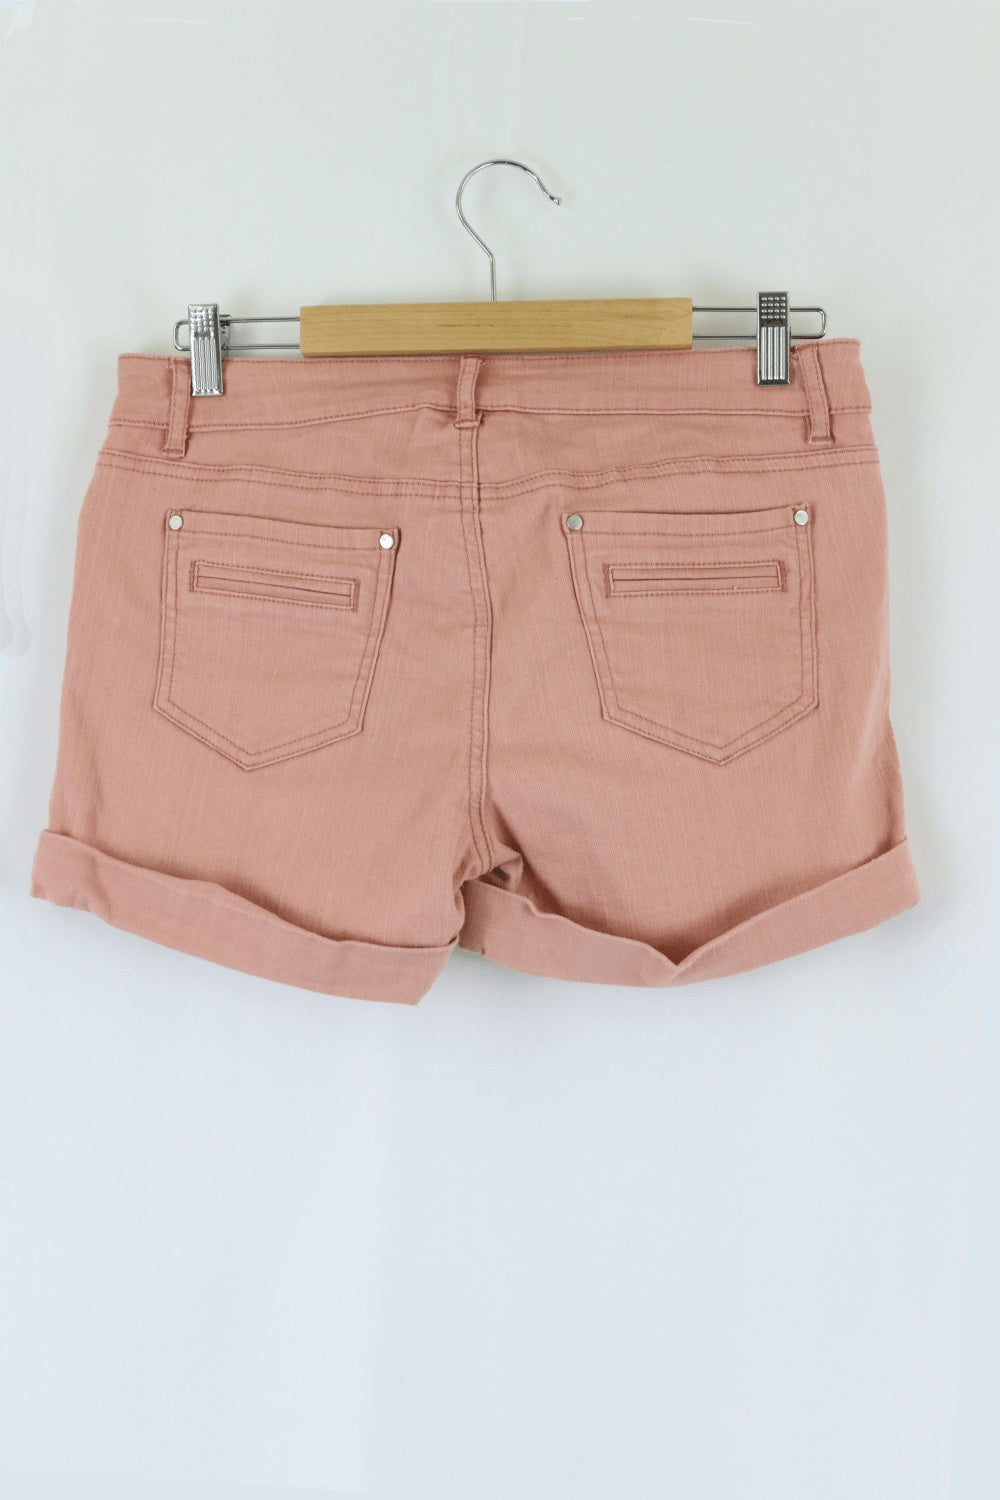 Witchery Pink Short 10